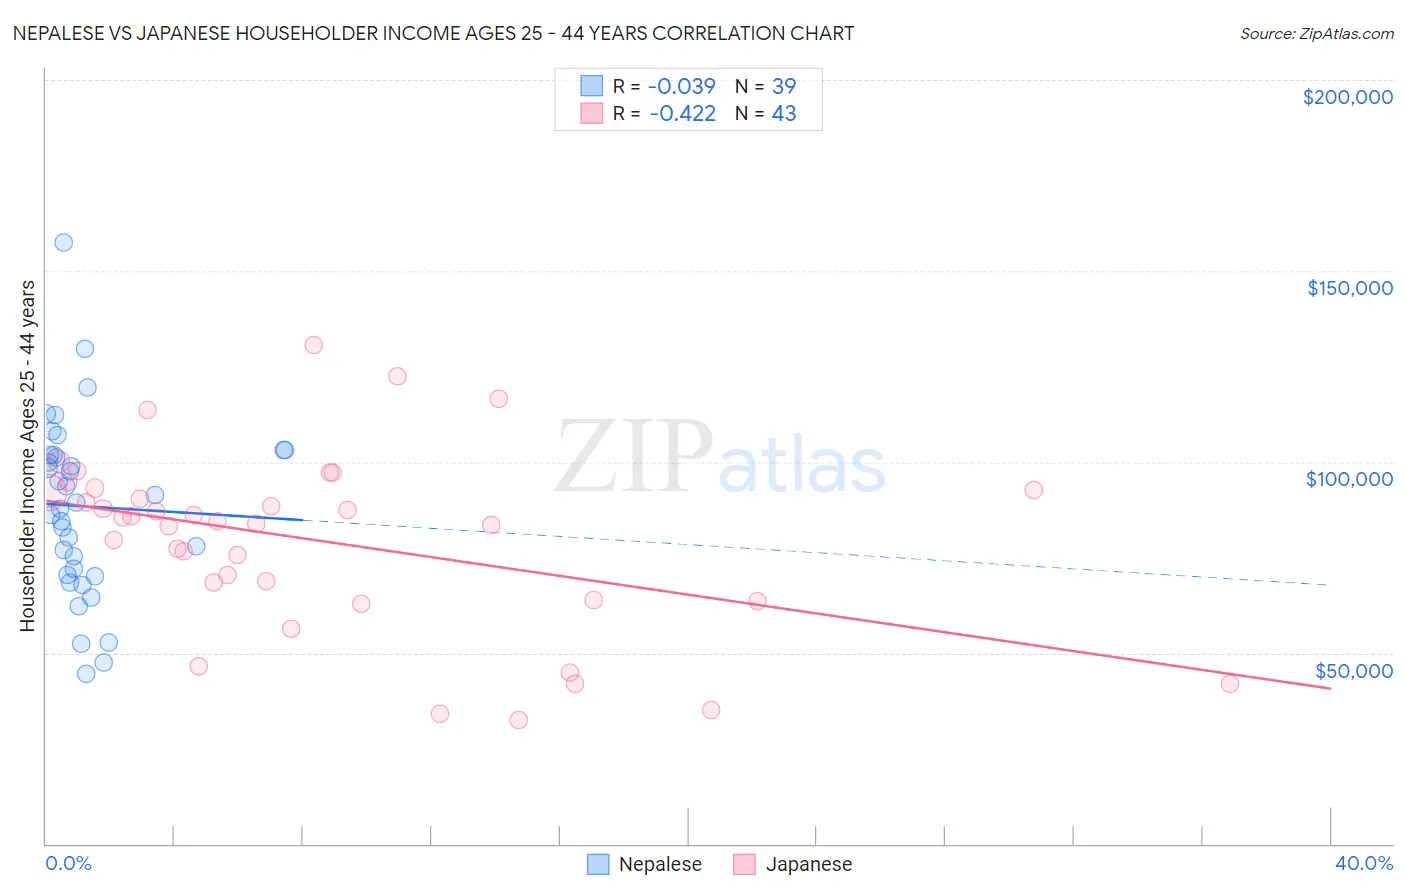 Nepalese vs Japanese Householder Income Ages 25 - 44 years